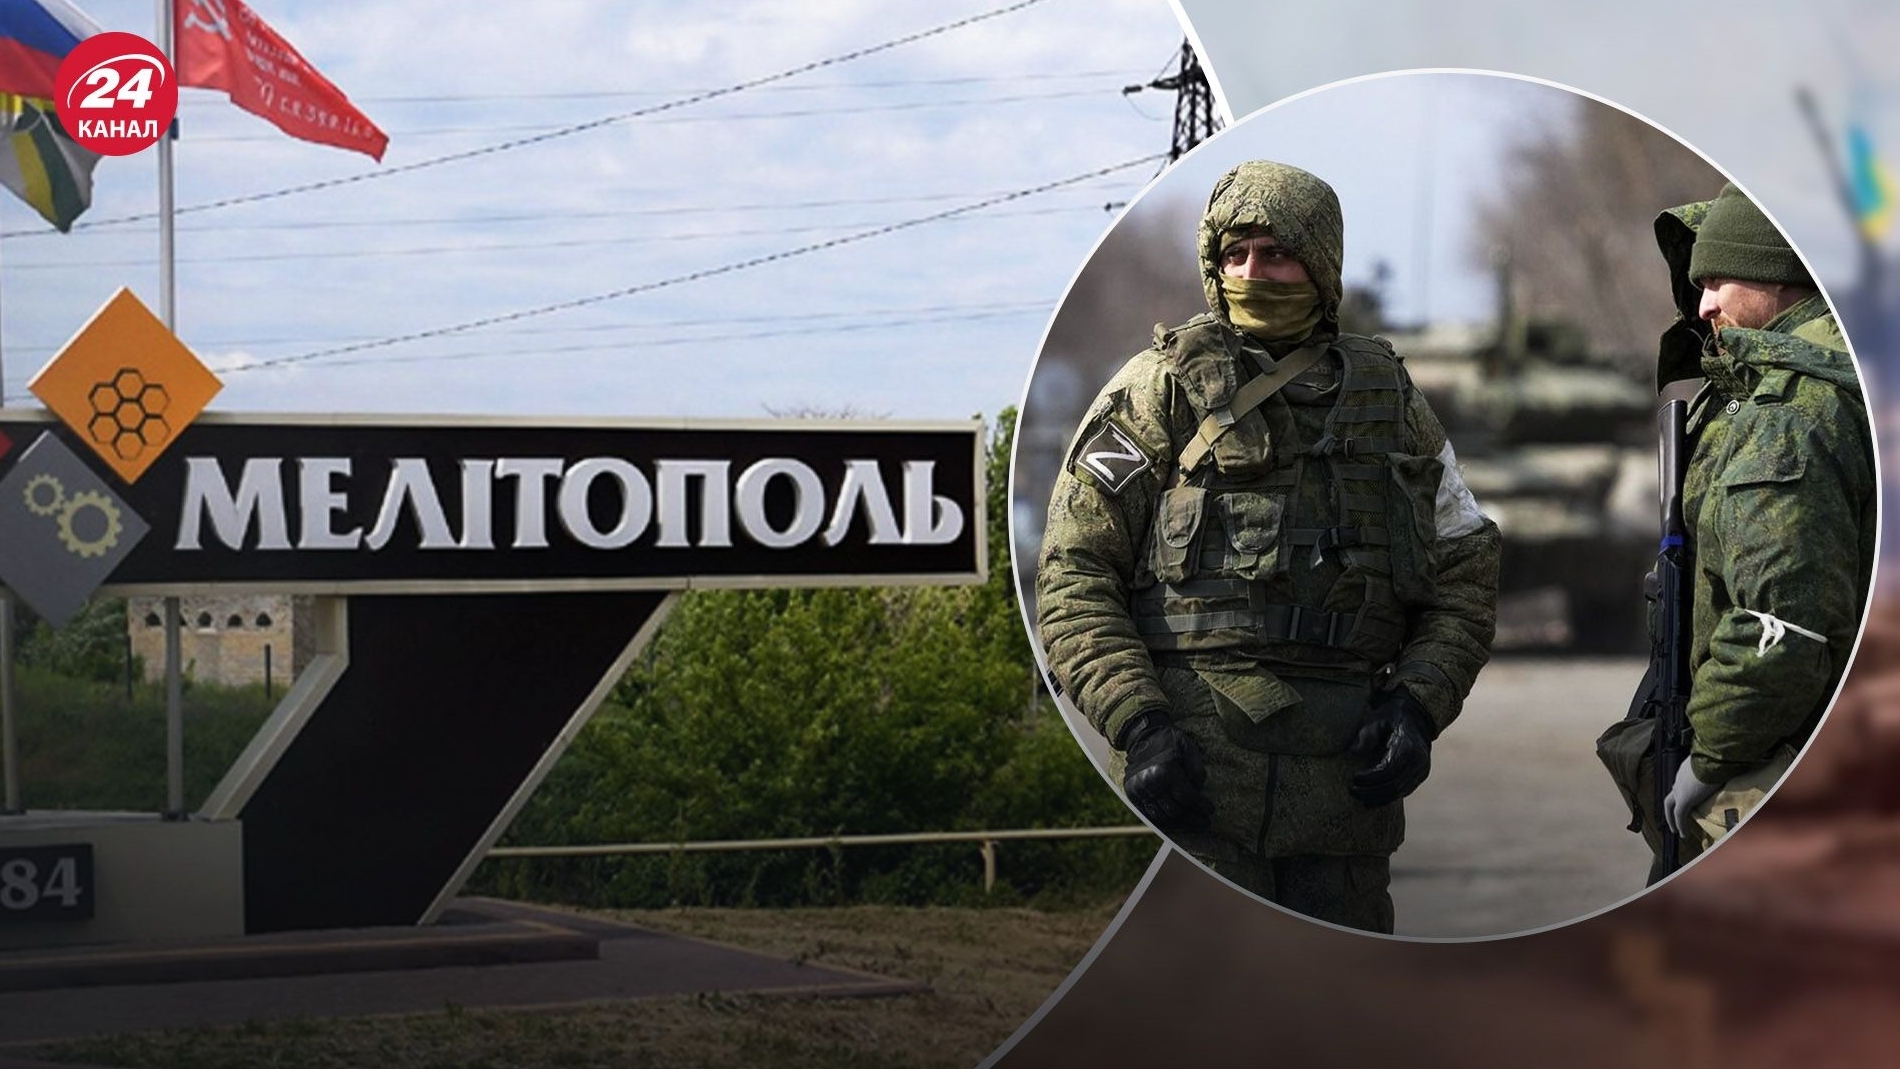 In Melitopol, drunk occupants opened fire on FSB officers. You are rear rats, but we fought